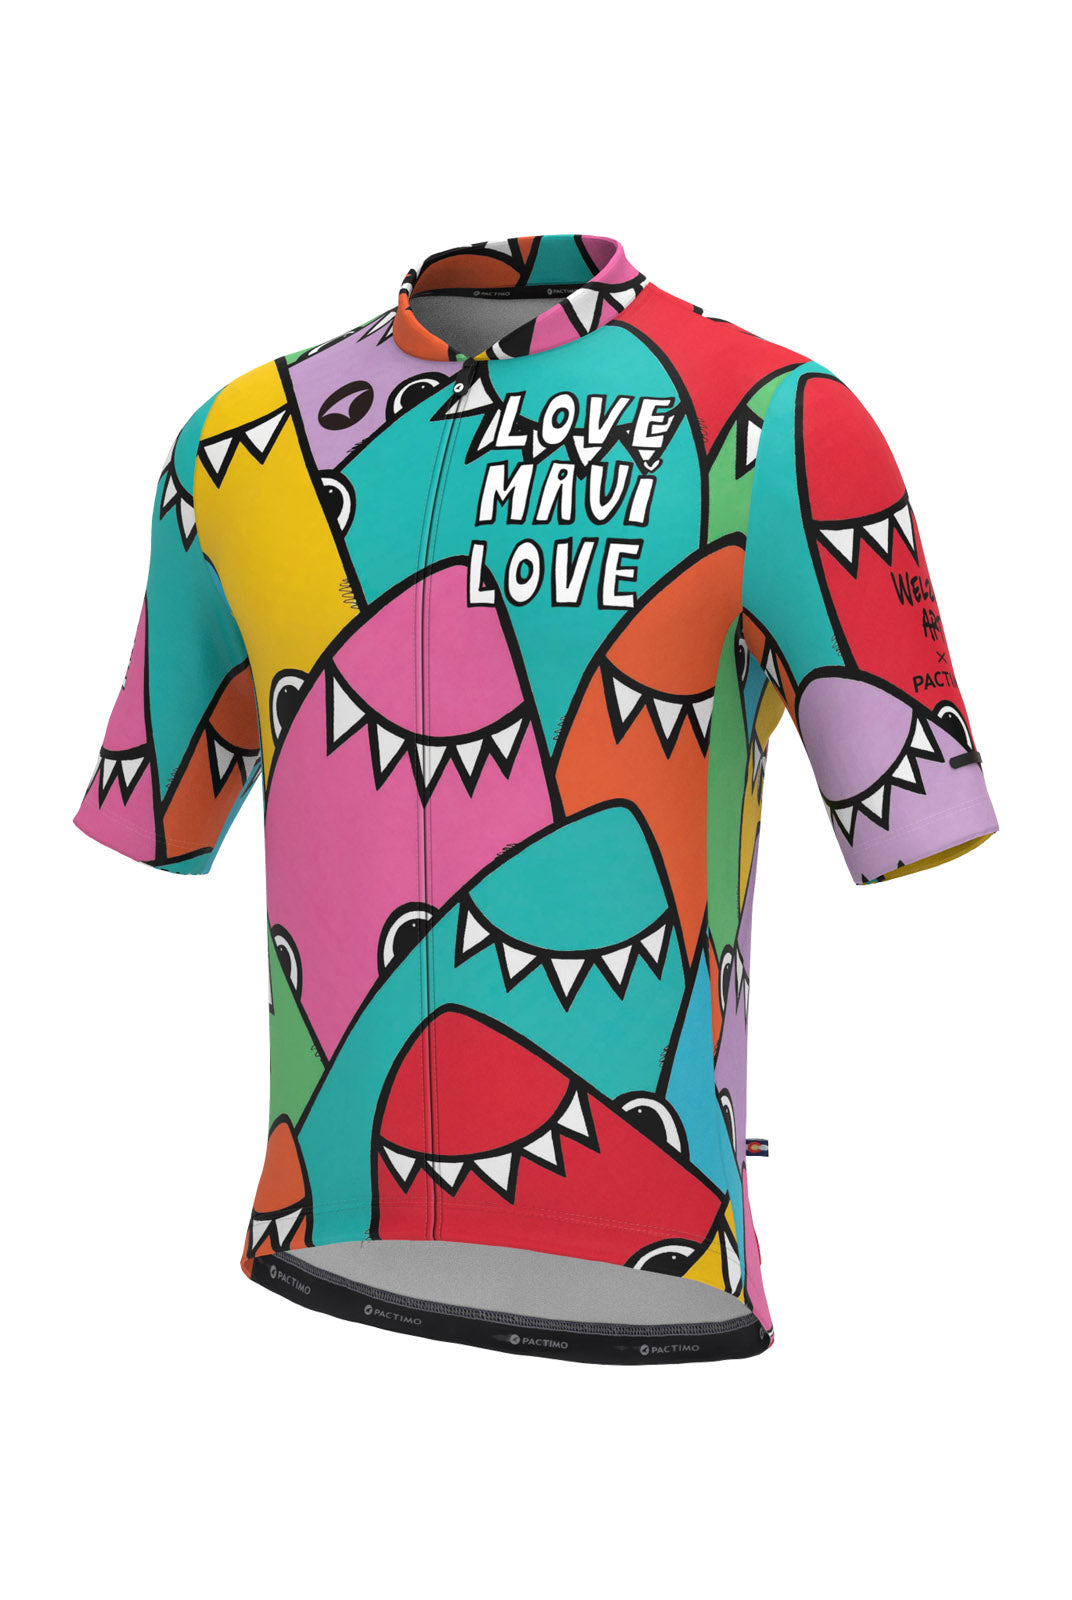 Maui Relief Cycling Jersey for Men - Welzie Rainbow Design Front View